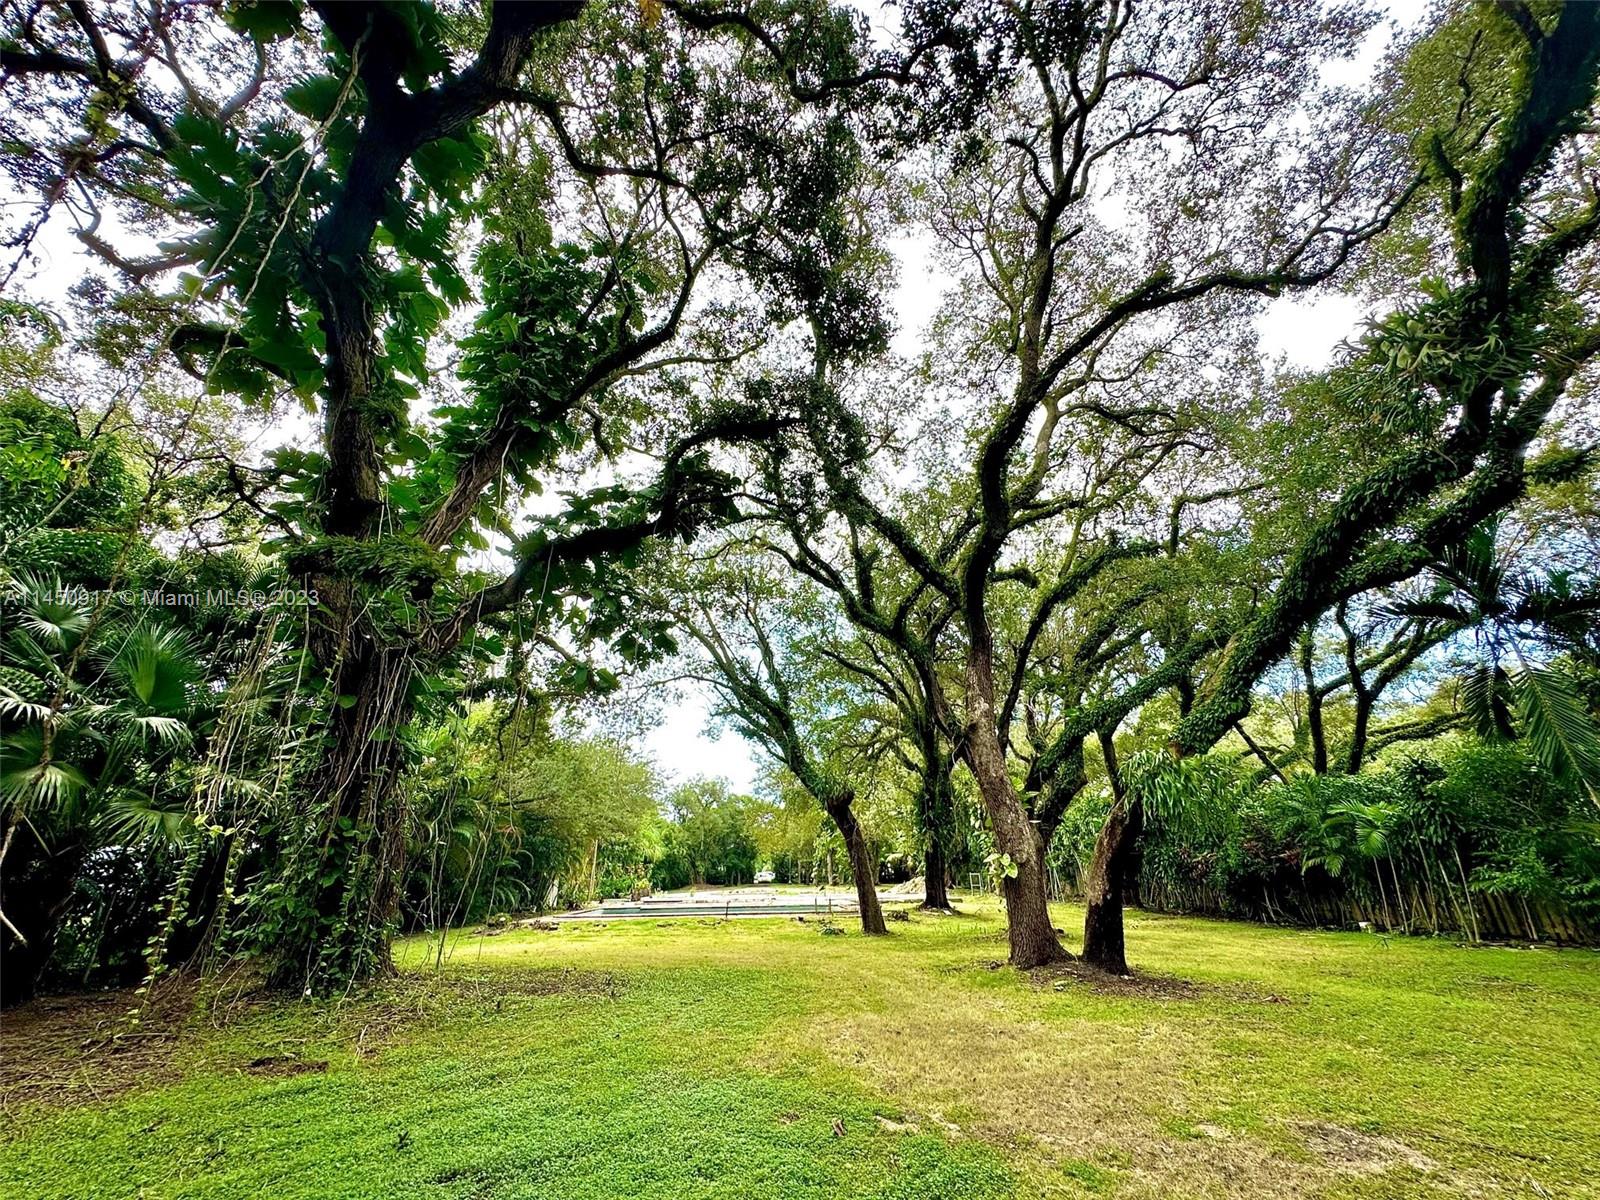 1 Acre lot located in beautiful neighborhood of Skylake. Full set of plans finished and ready to be submitted for approval to build elegant and modern house shown in the pictures. Property is unique with over 30 oak trees and amazing vegetation. Perfect for someone ready to start their dream home in this Triple A location just under 5 mins from Aventura, I-95, Sunny Isles Beach and more. The location is walking distance to Houses of Worship, Schools and is right in between Miami & Fort Lauderdale International Airports.